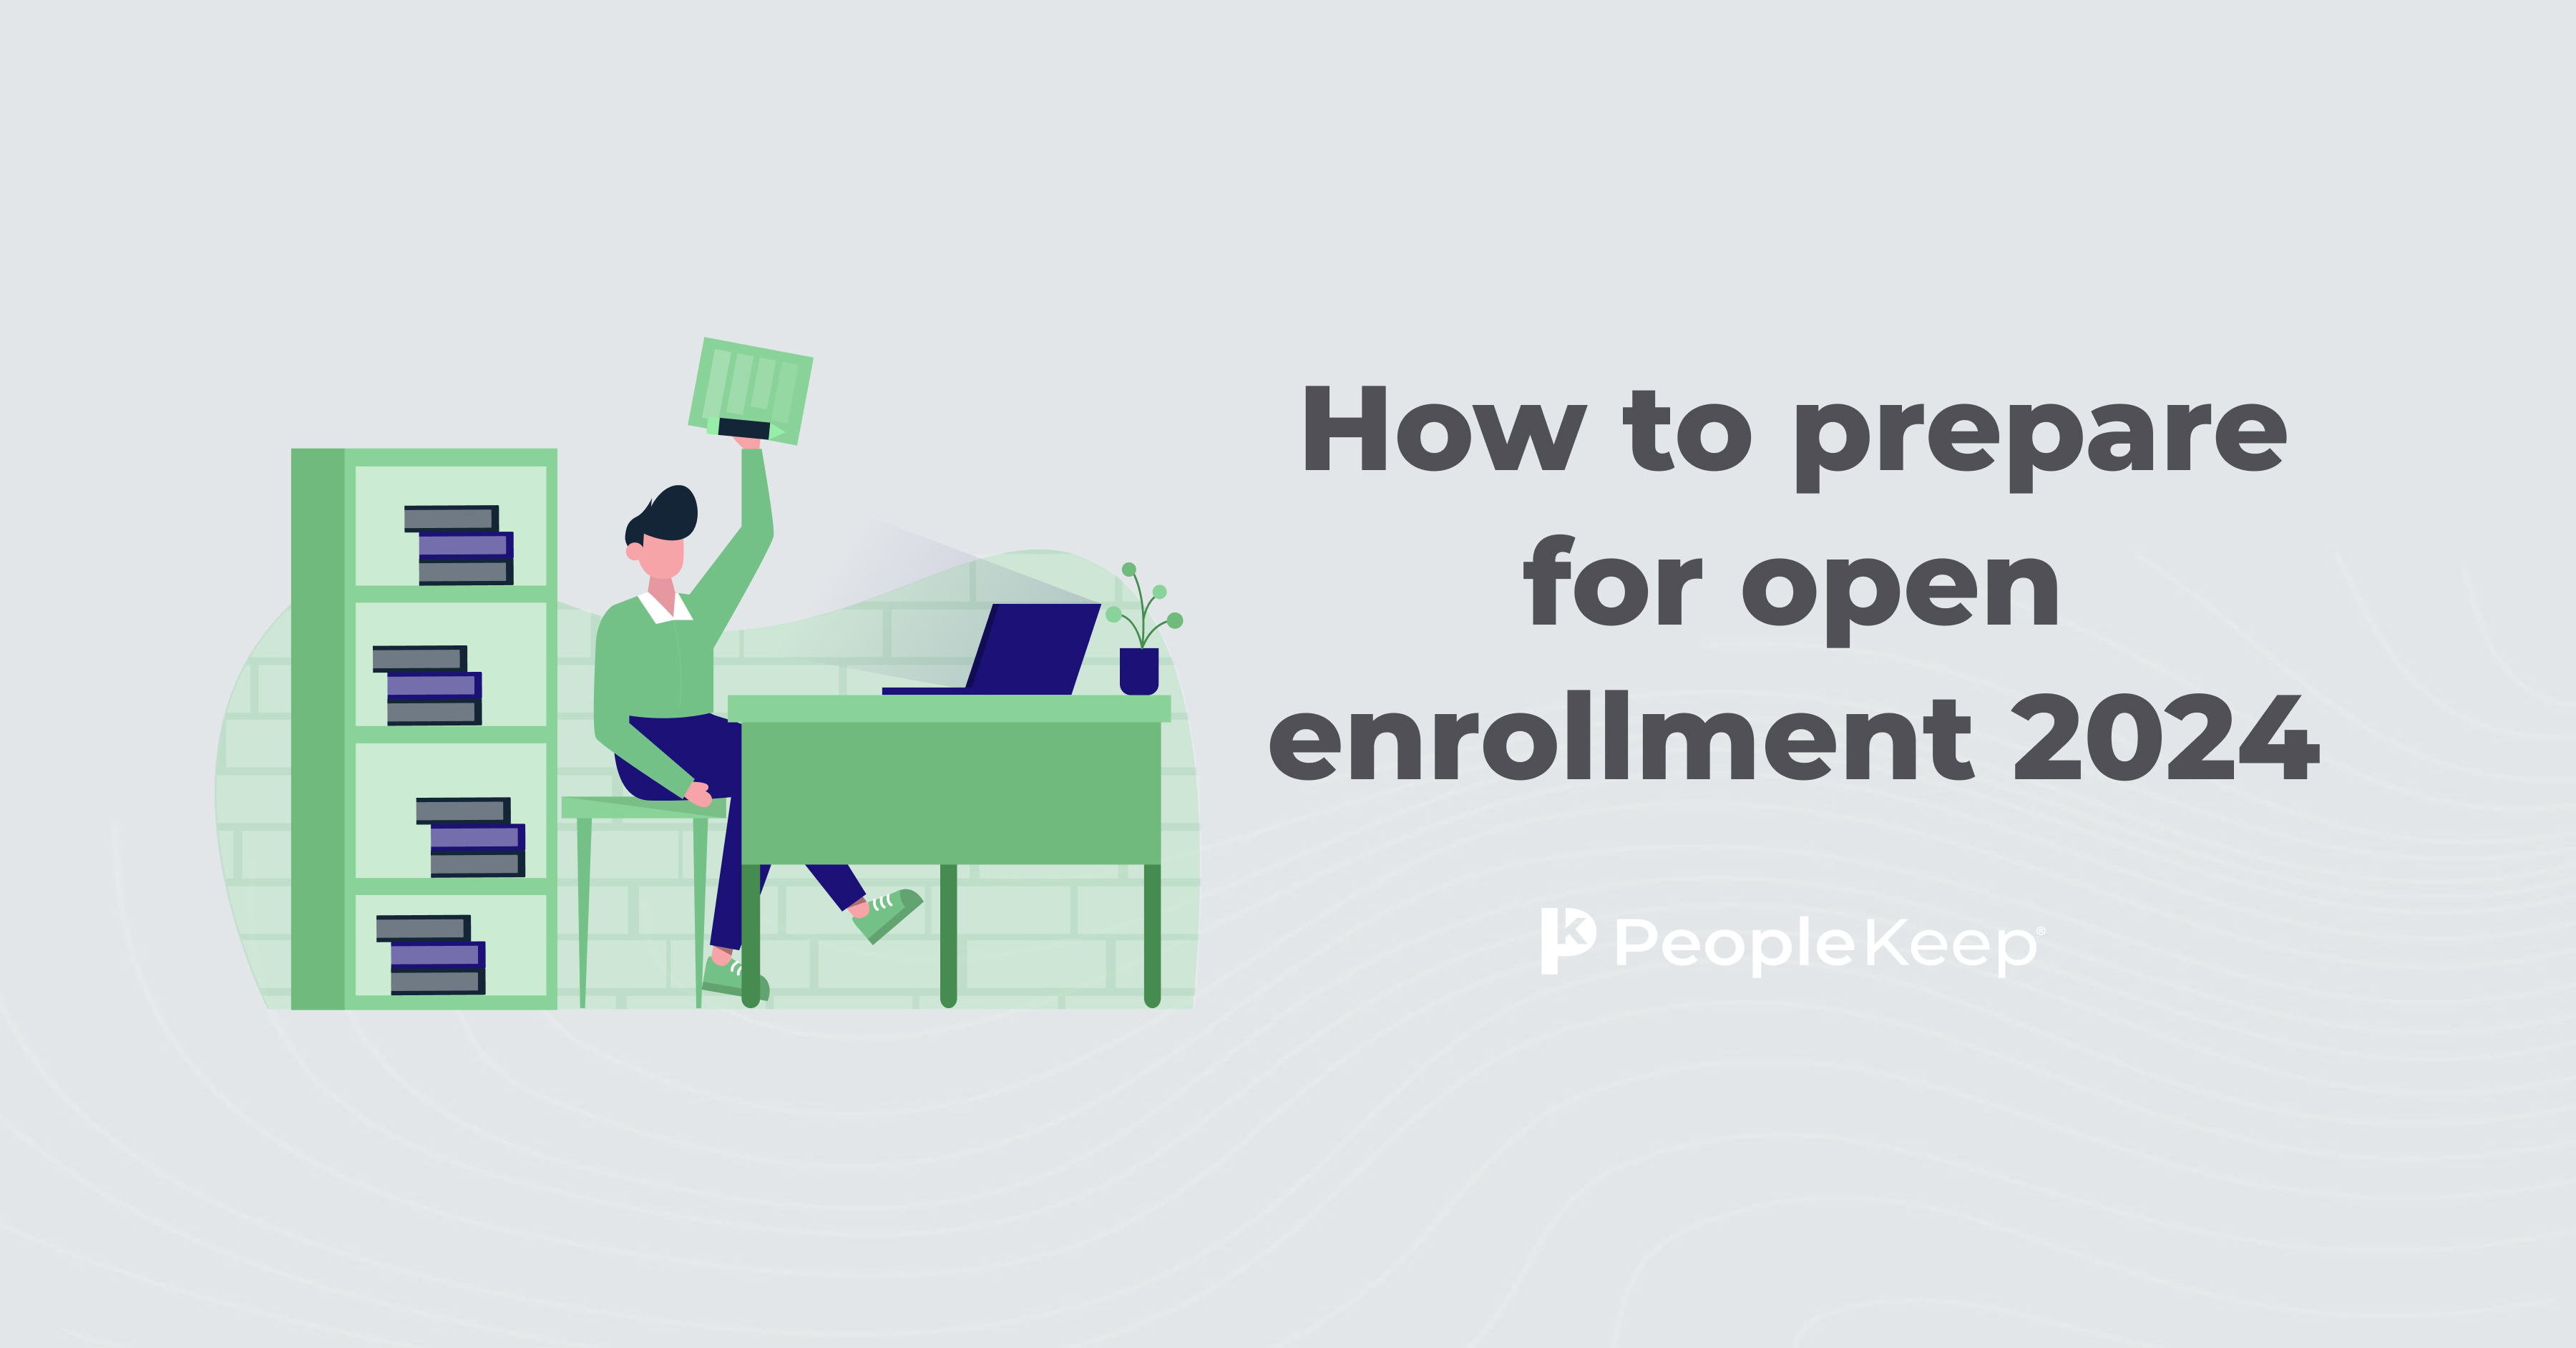 How to prepare for open enrollment 2023